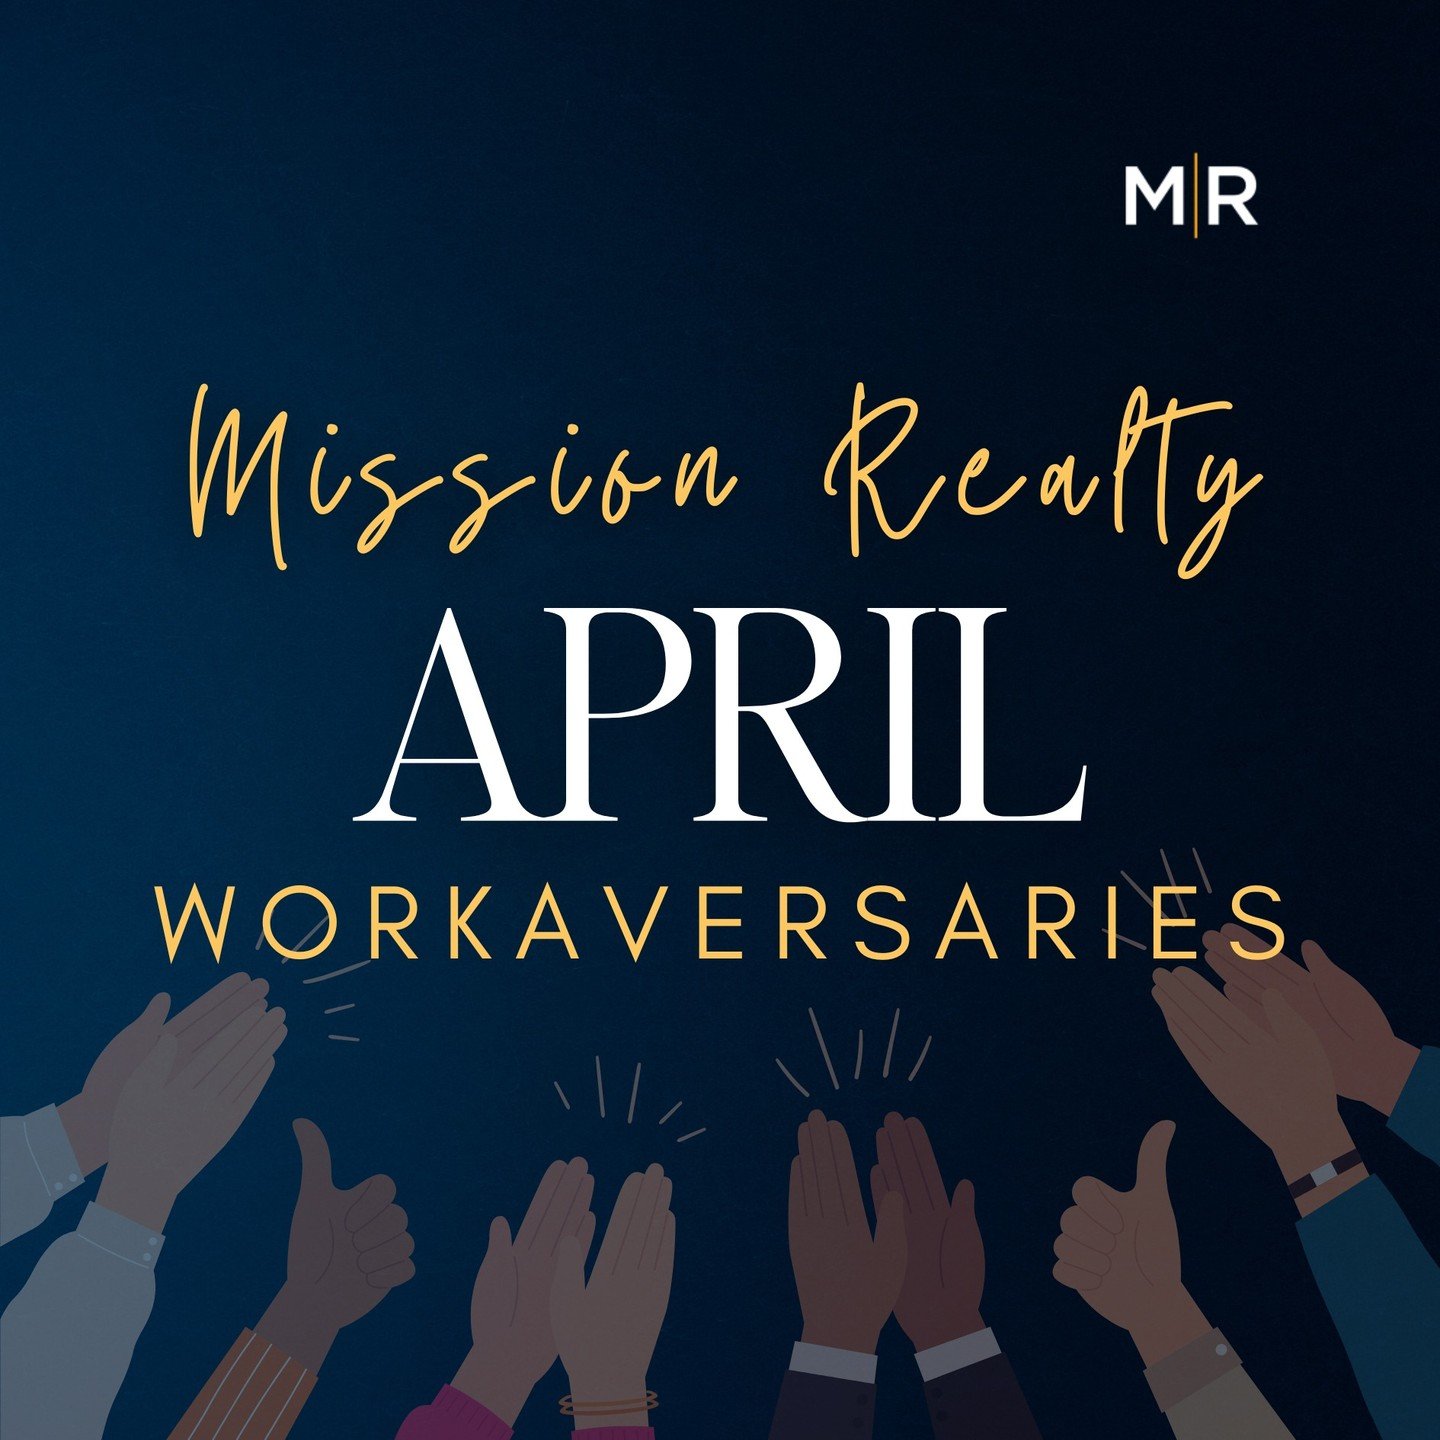 Marking April Milestones! 🌟 Celebrating another year of dedication and success with our incredible team: Tamara McGhee (Sales Partner and Listing Mentor - 4 years), Robert Mooney (Sales Partner - 4 years), Jessie Jones (Sales Partner - 2 years), and